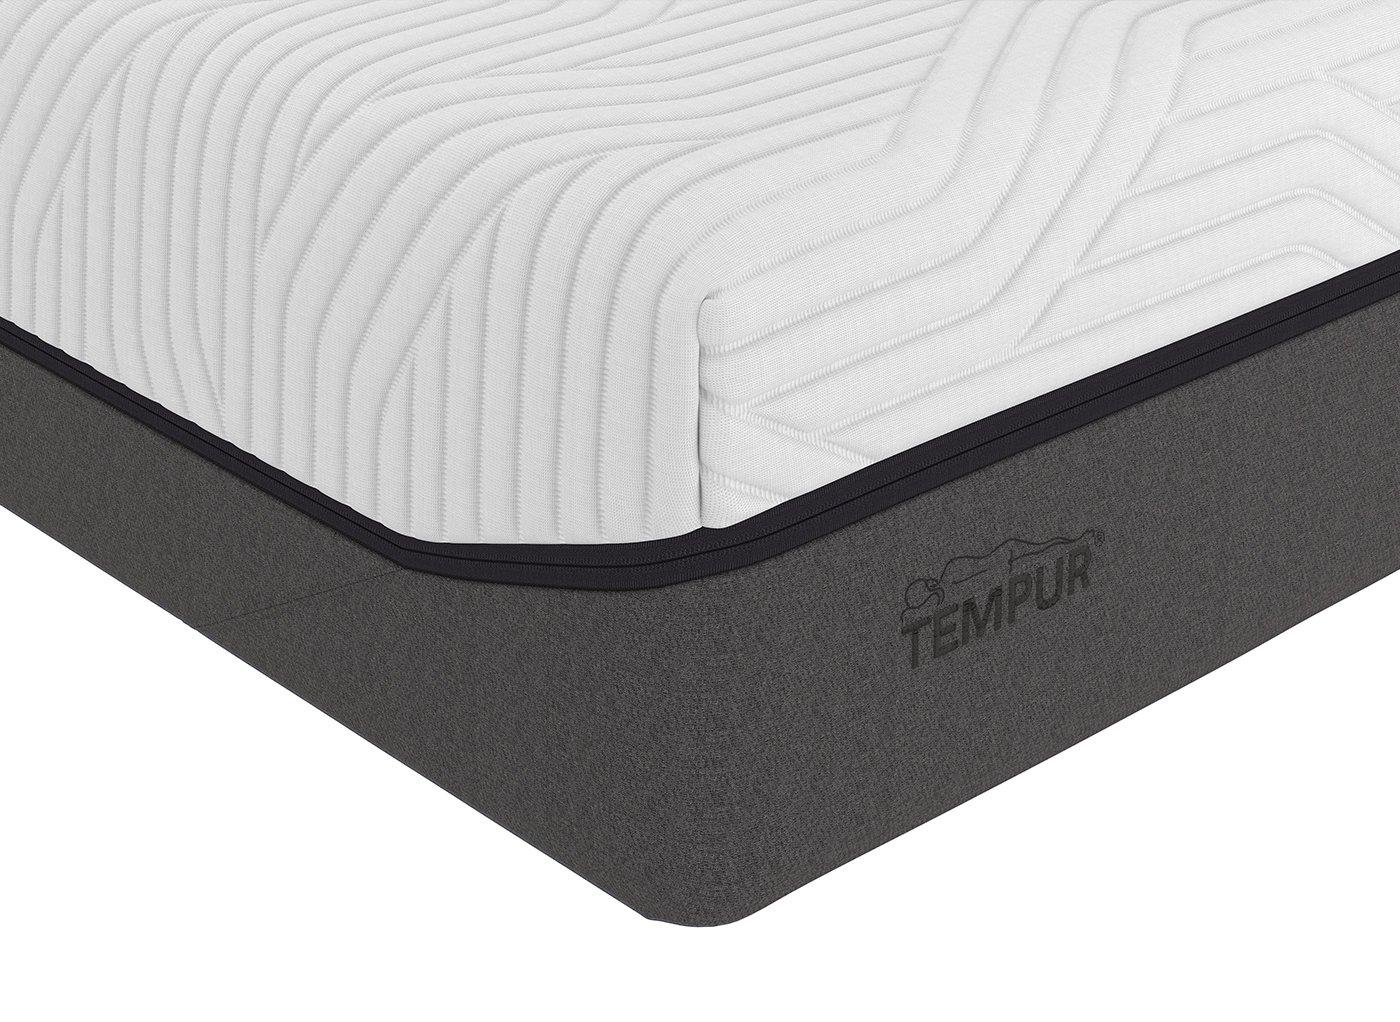 What Is The Difference Between A Firm And An Extra-firm Mattress?